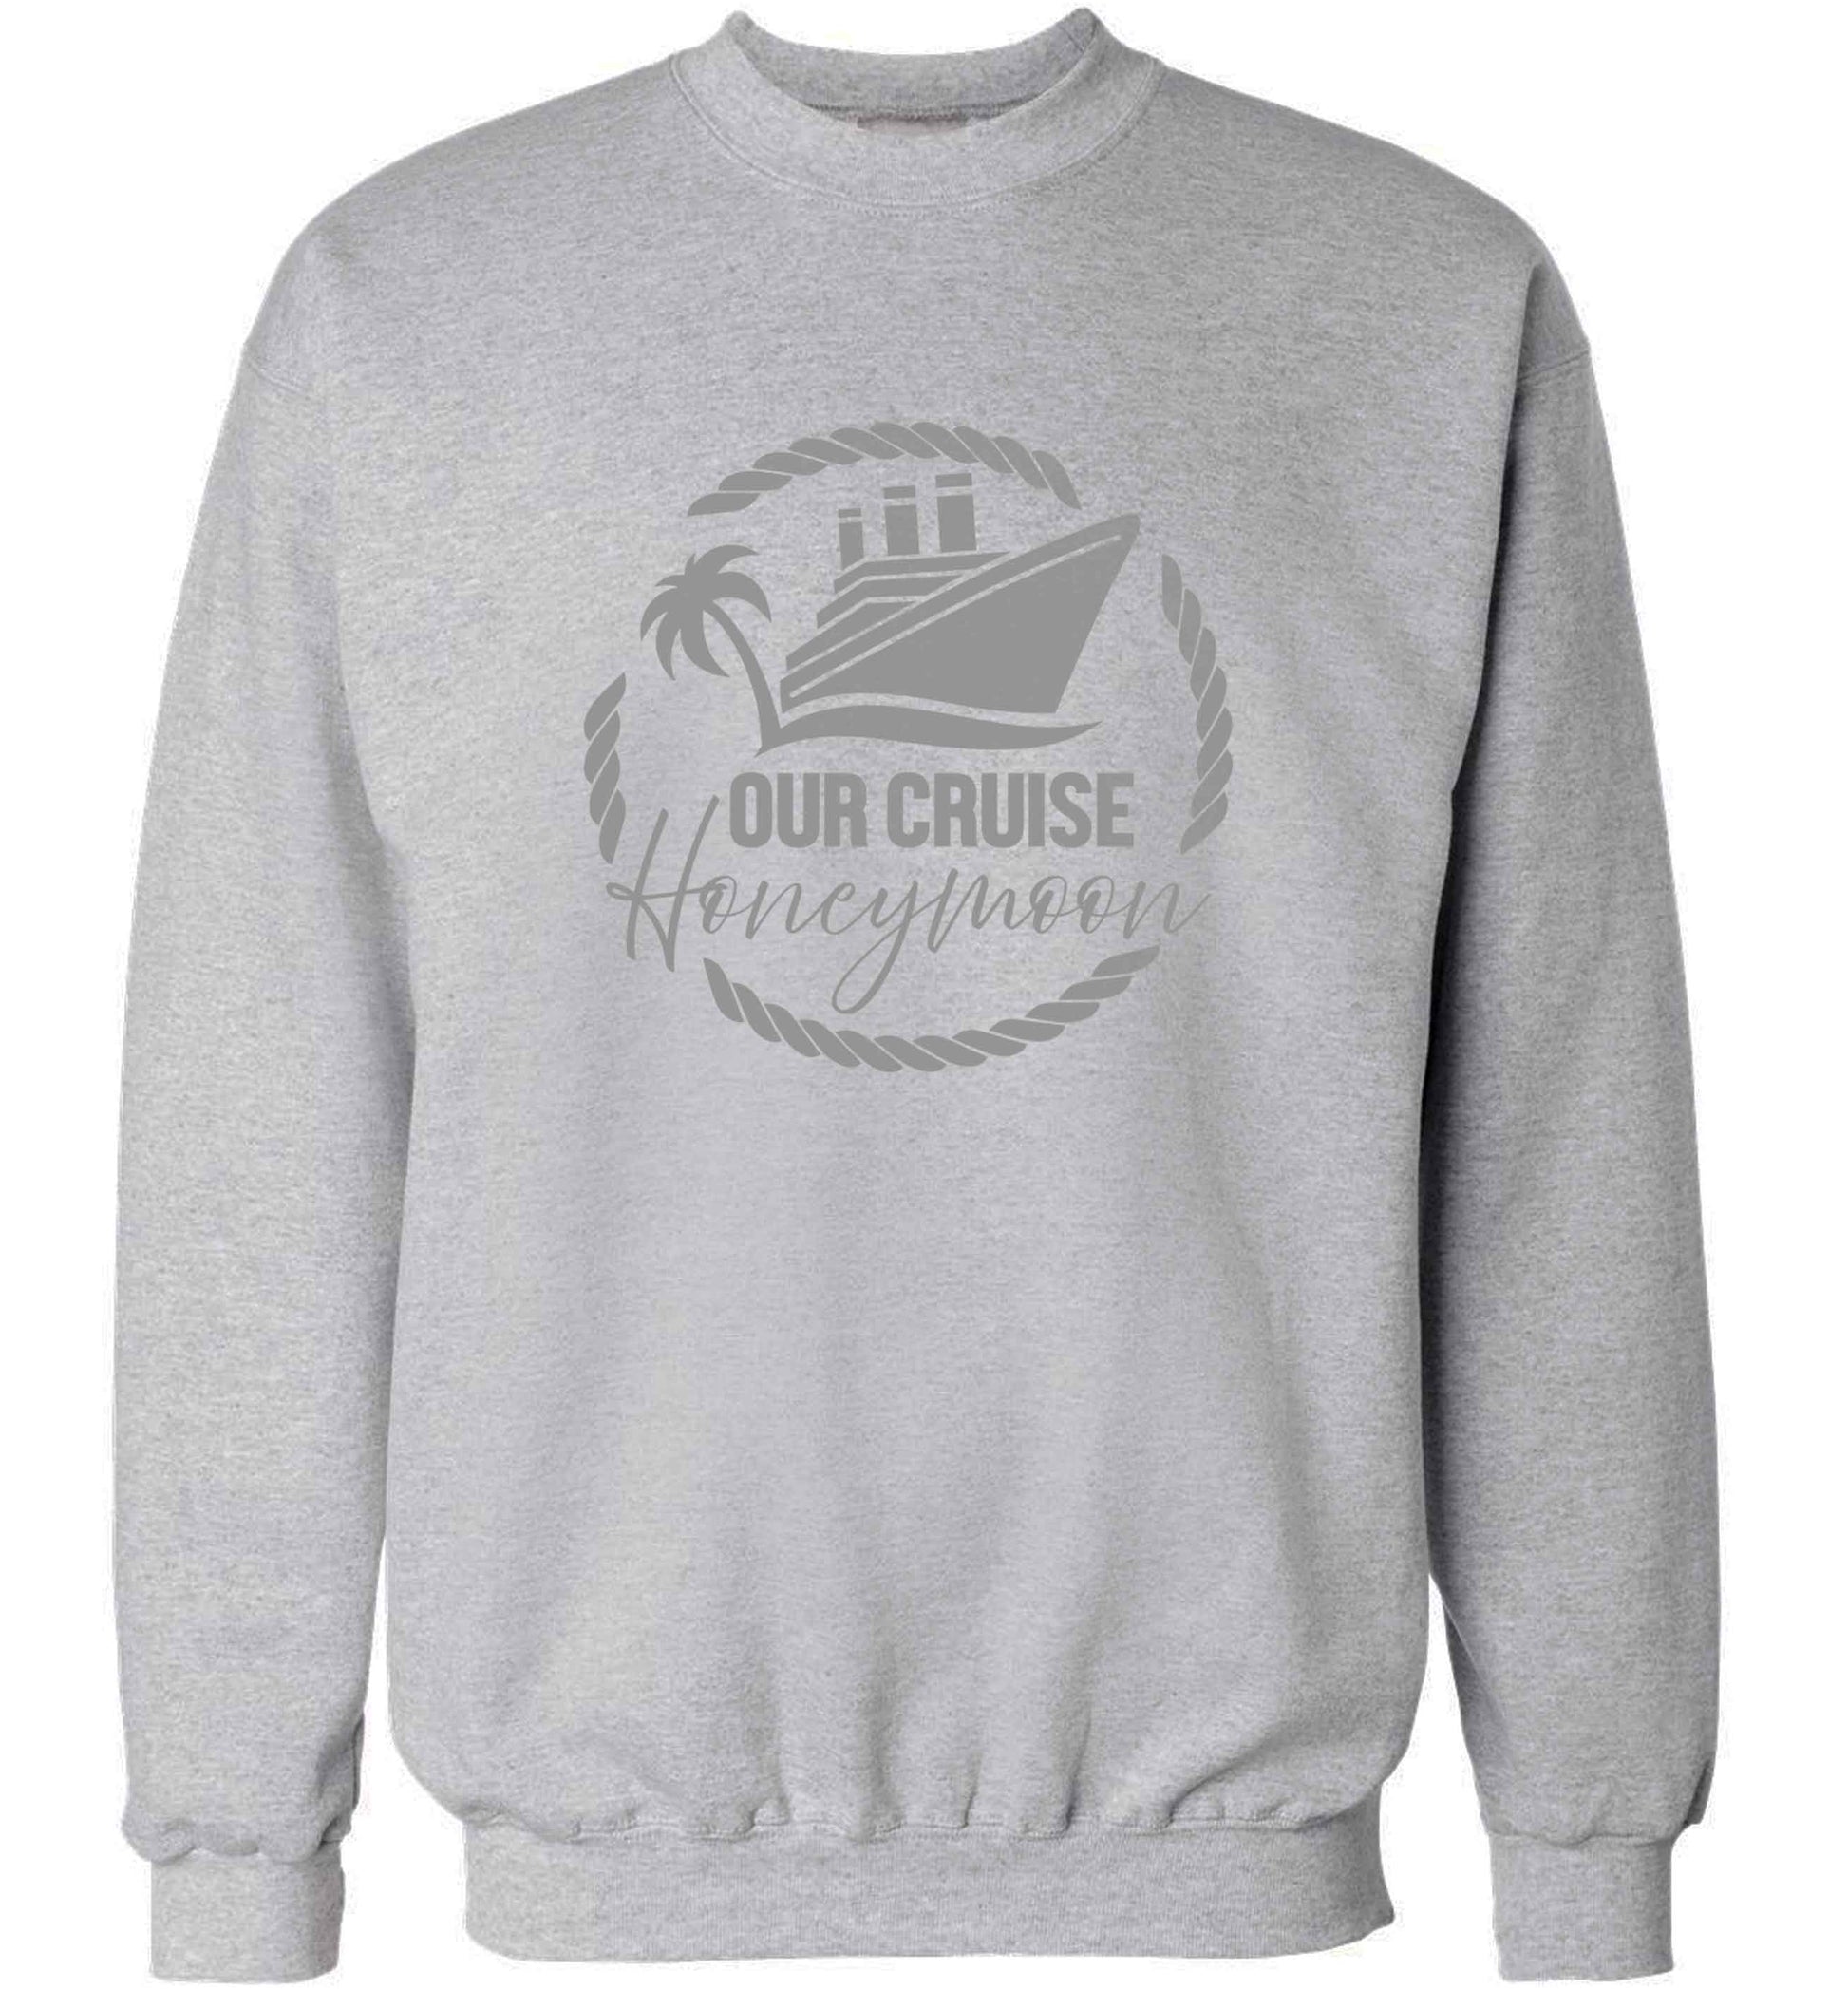 Our cruise honeymoon adult's unisex grey sweater 2XL